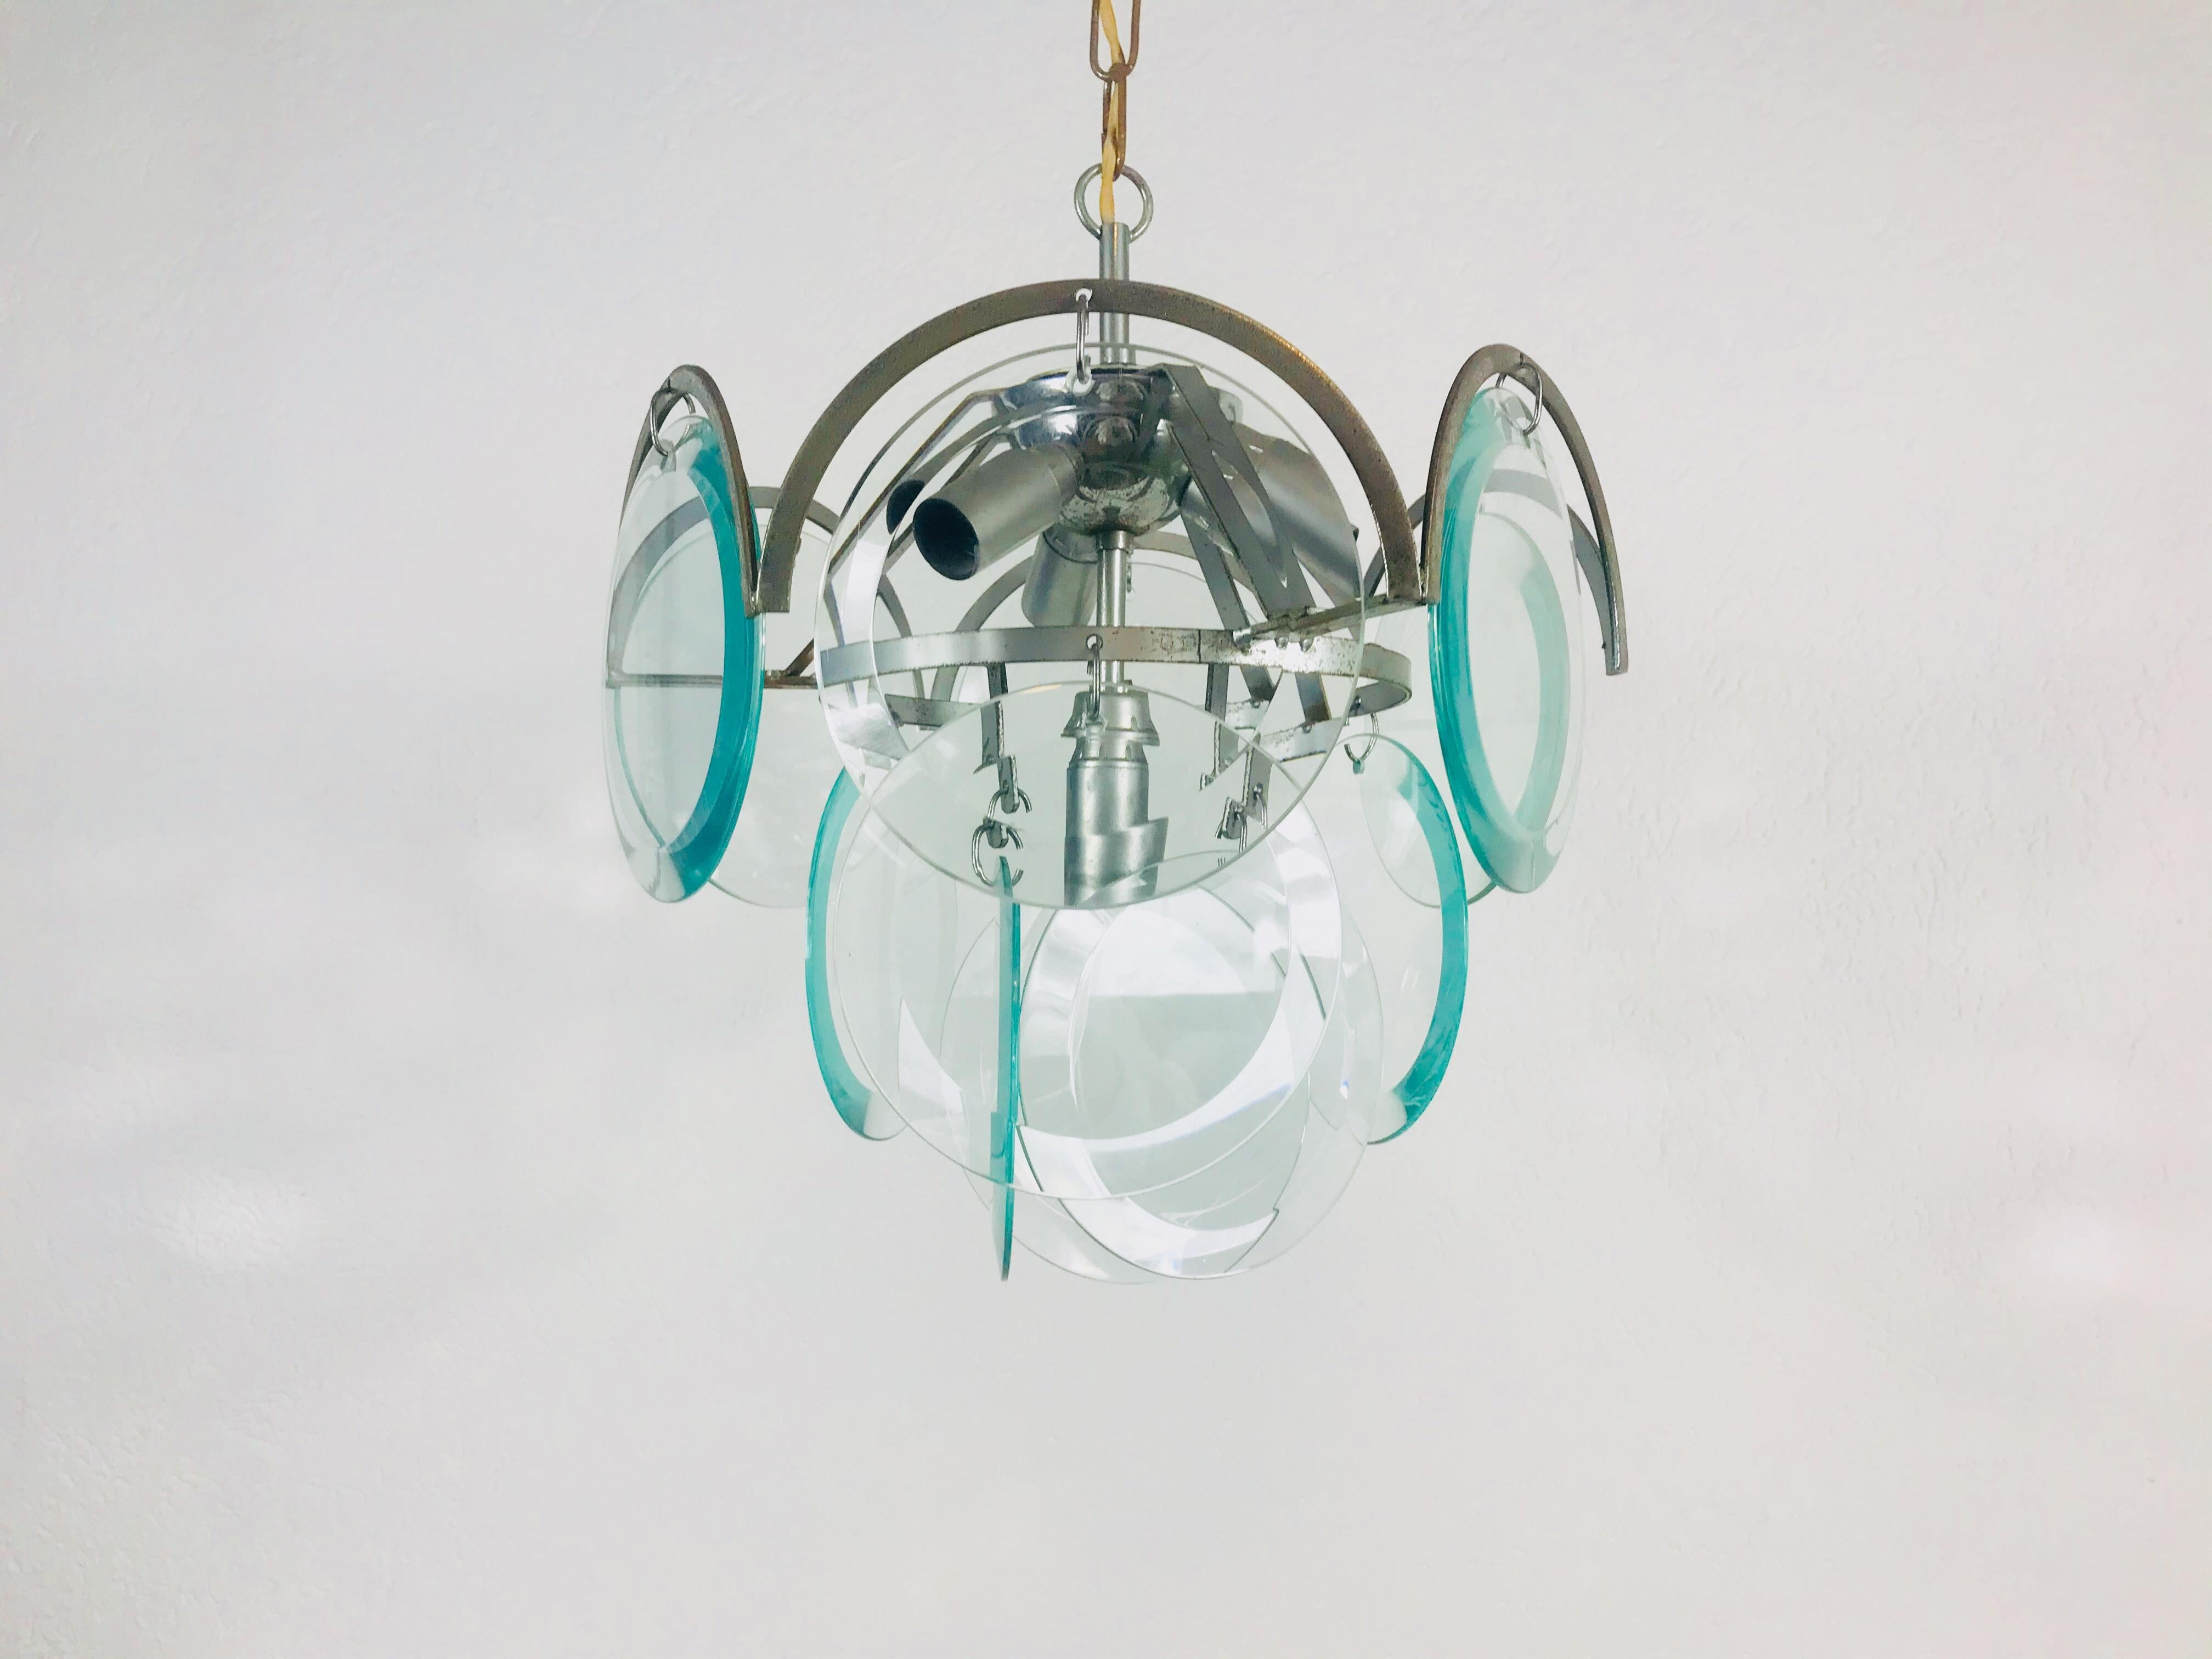 German Midcentury Three-Tier Chrome and Glass Chandelier by Vistosi, 1960s